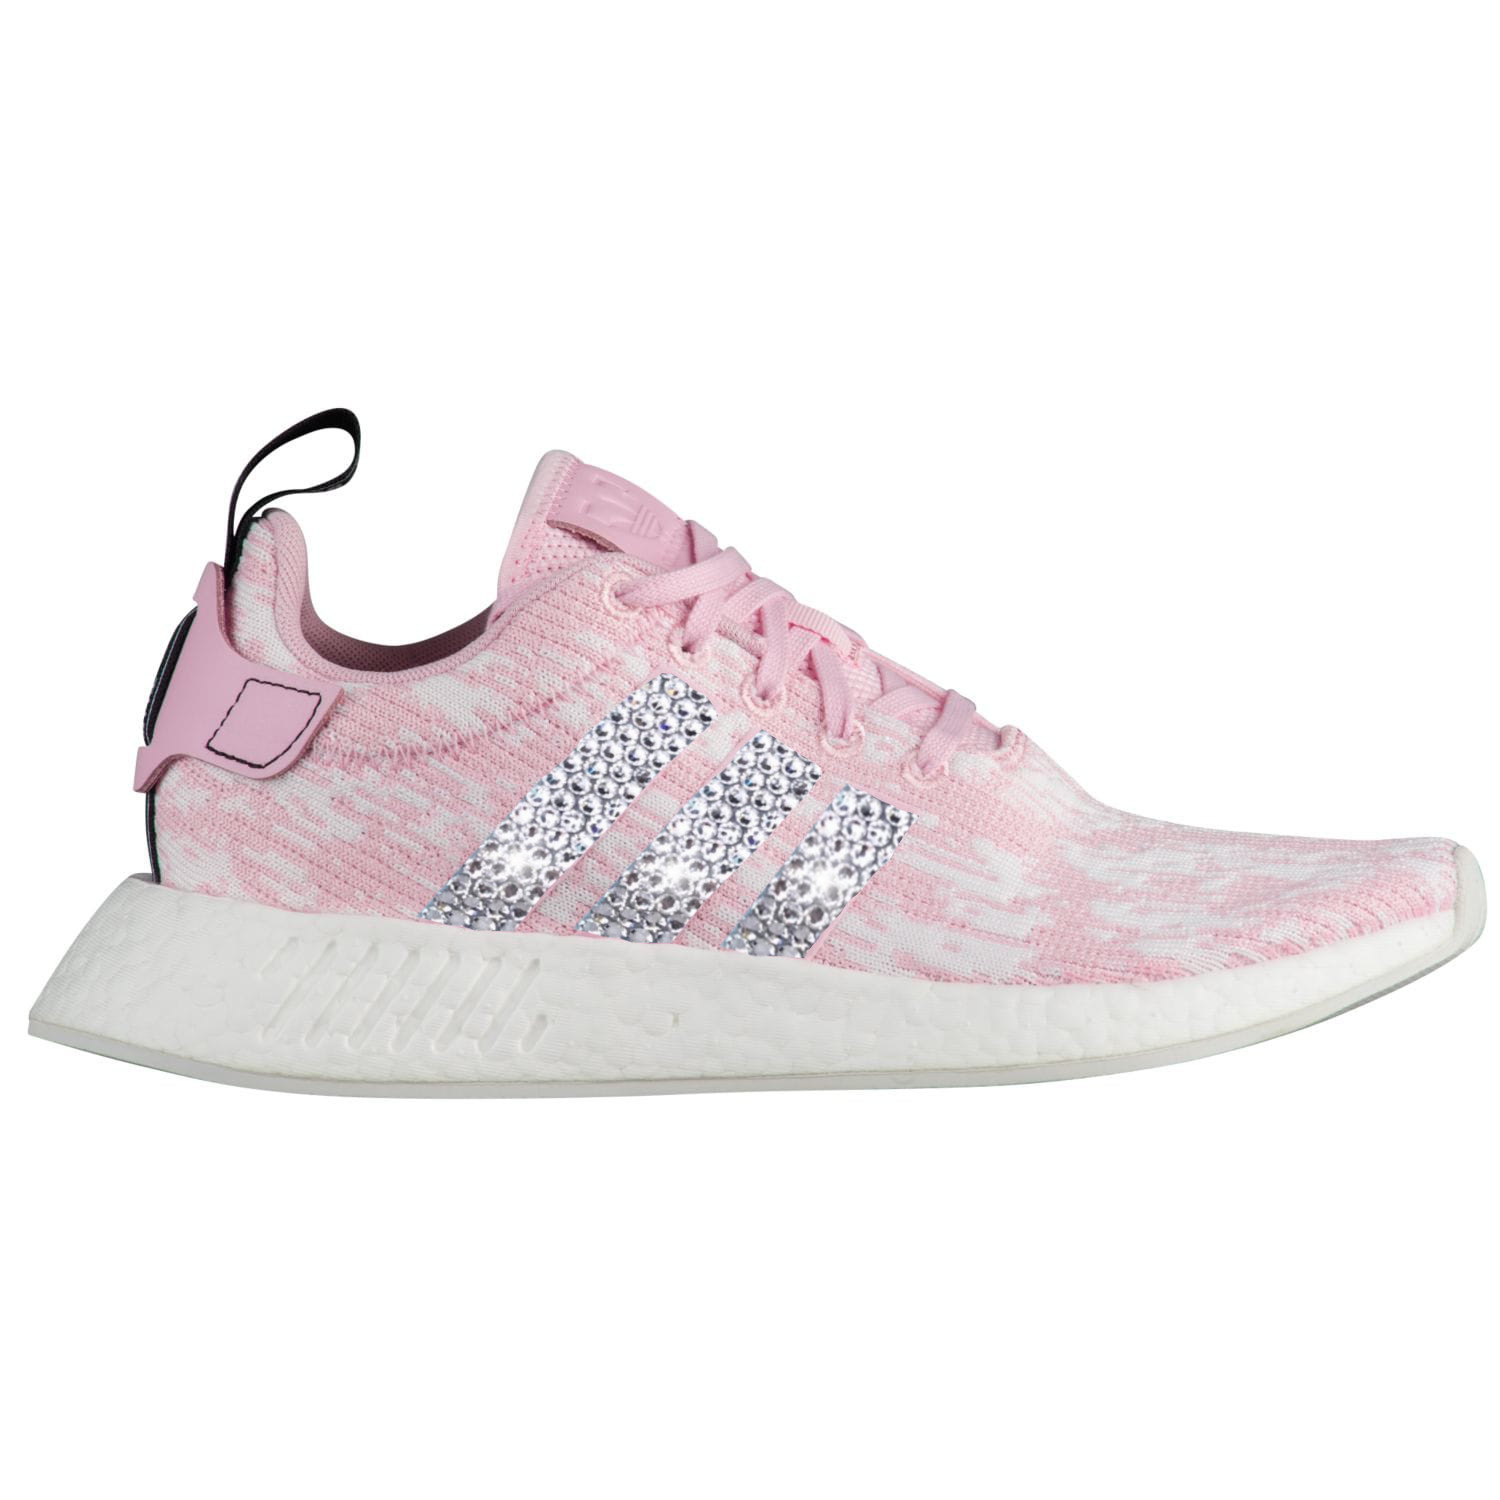 adidas shoes with pink stripes